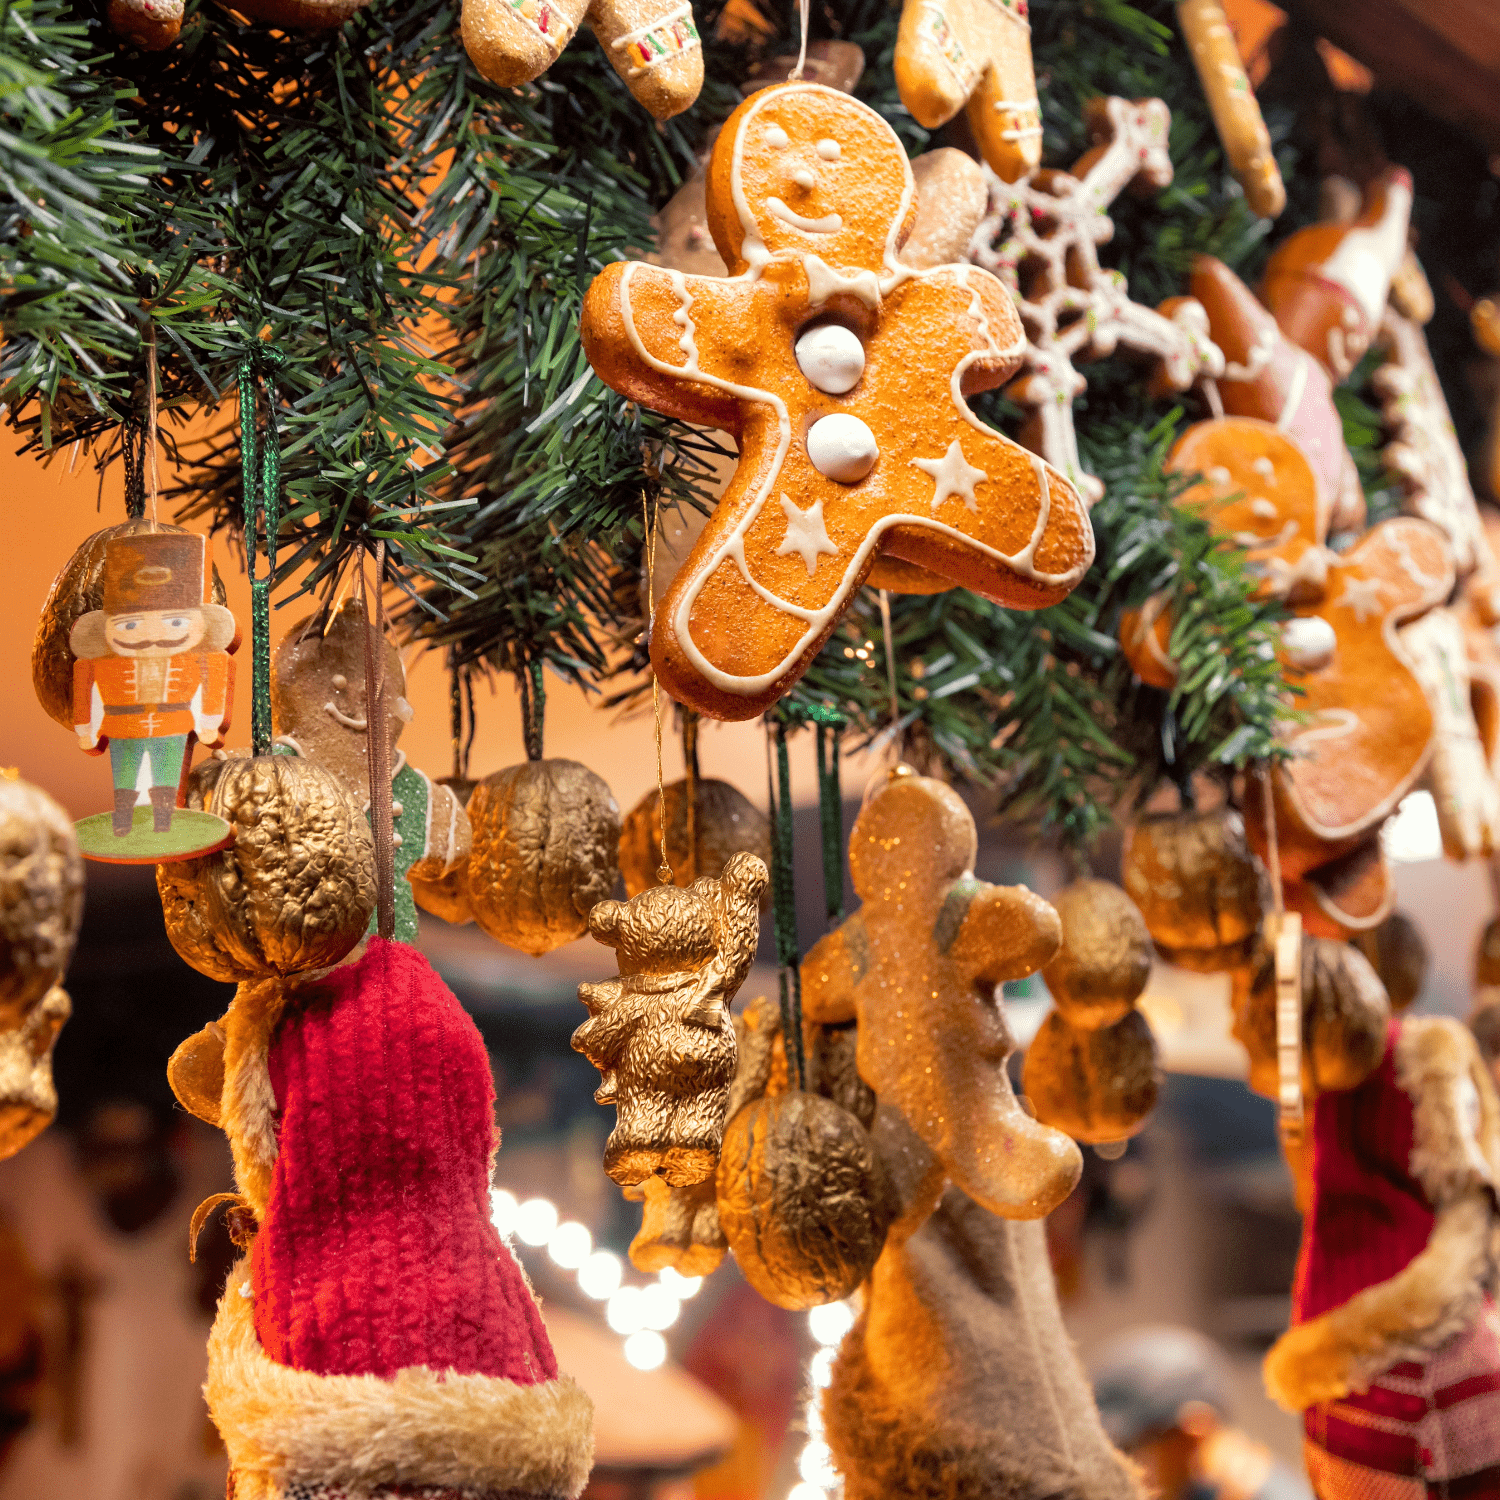 Christmas decorations and gifts for sale at a fair